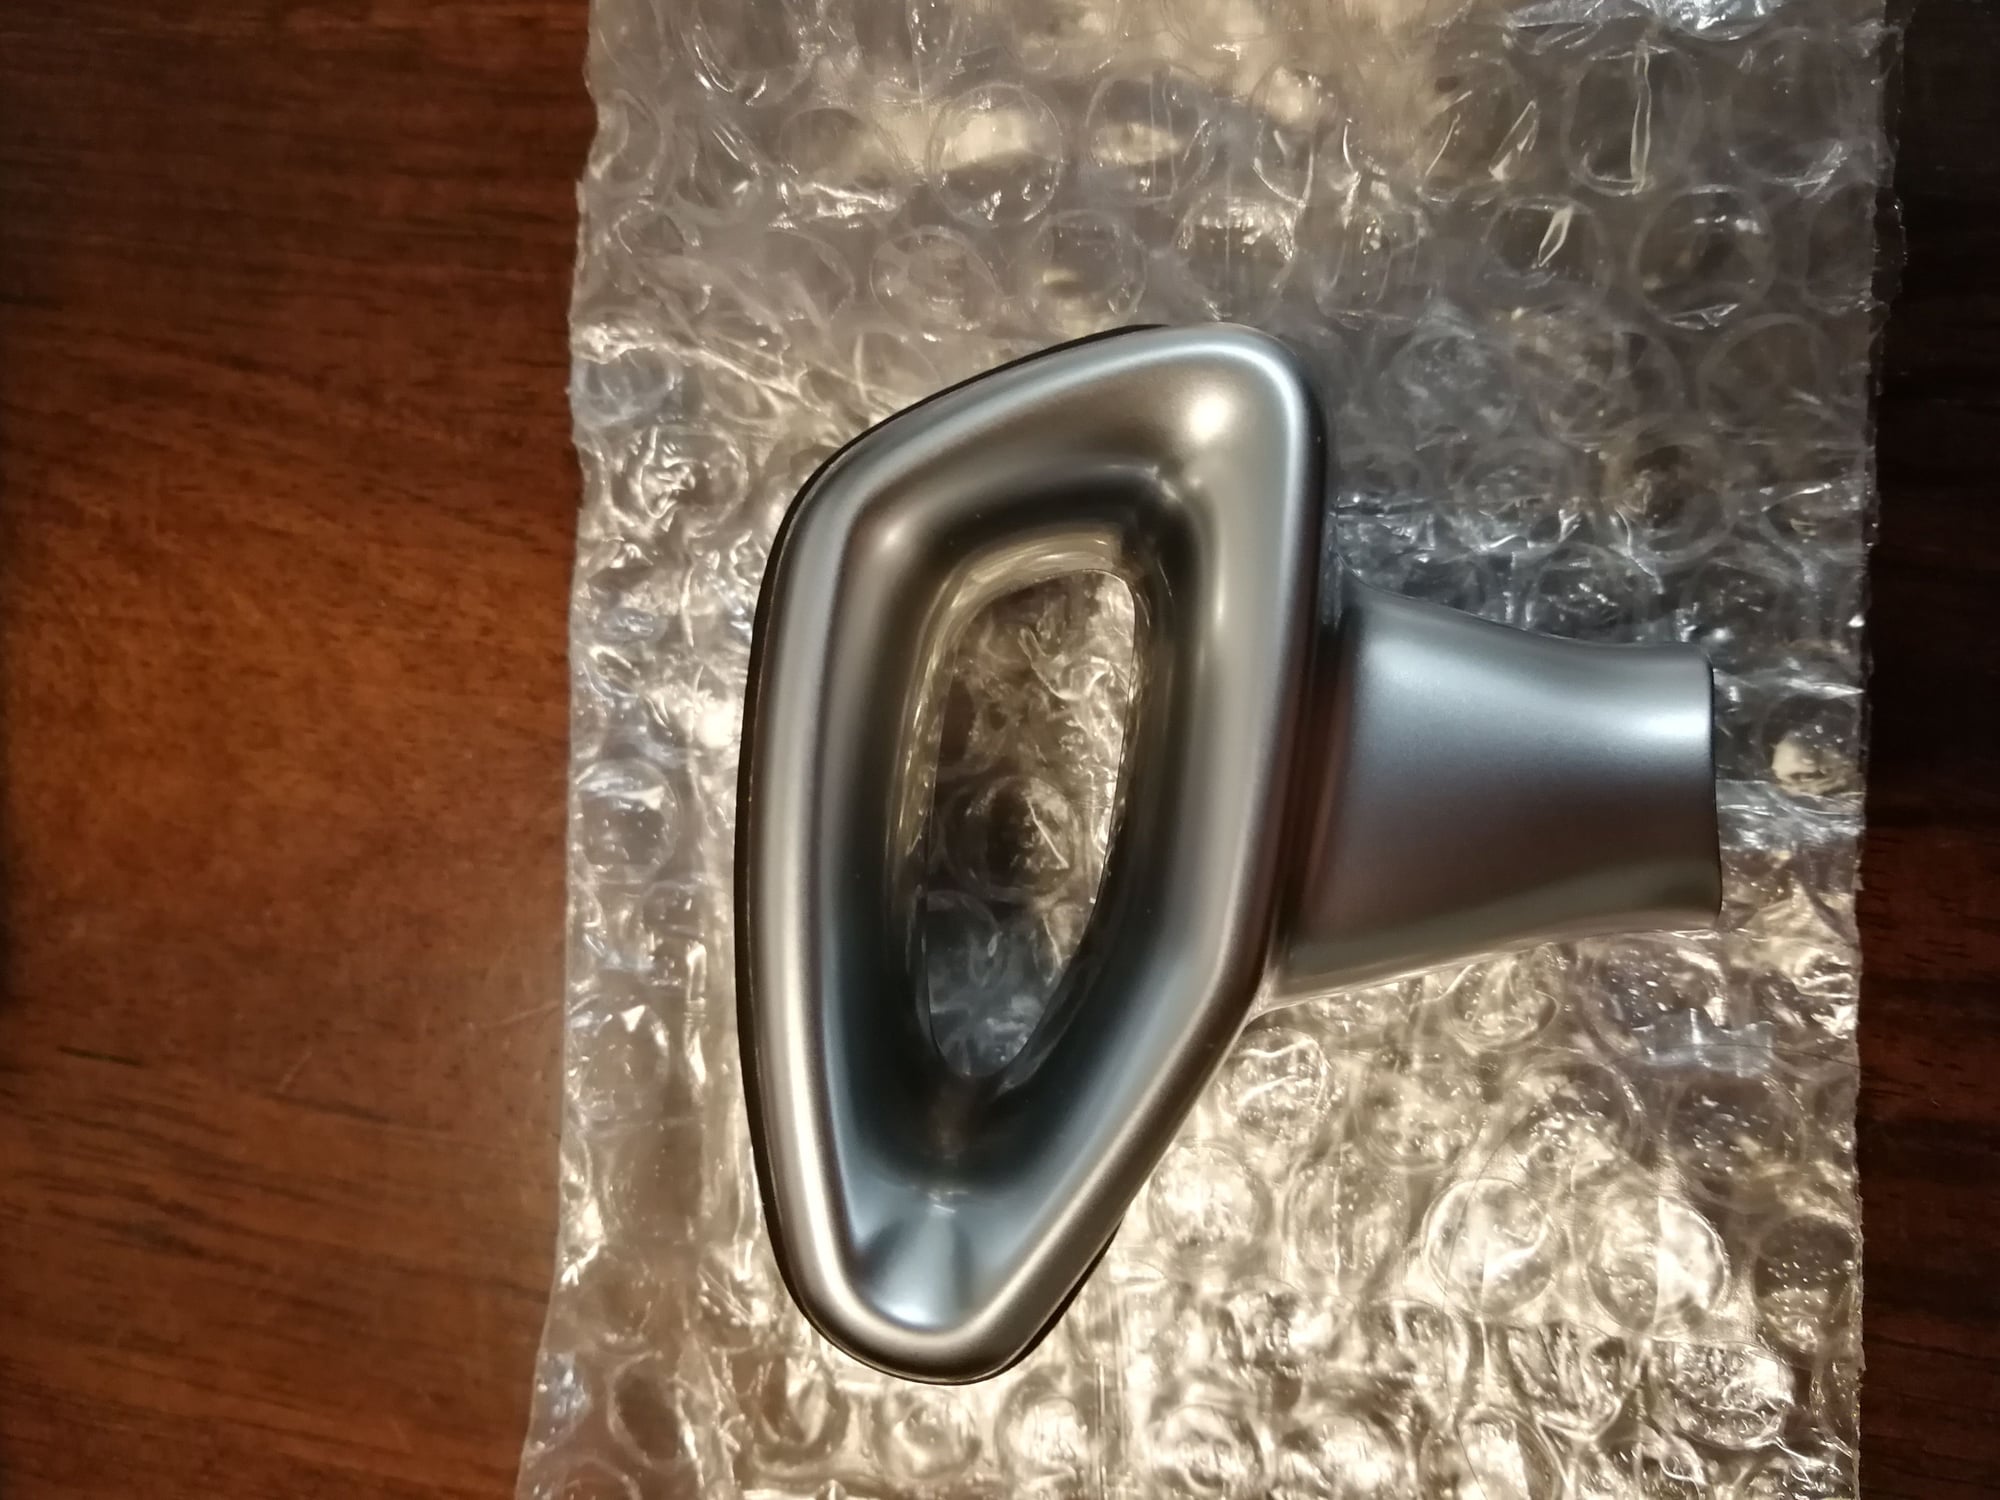 Interior/Upholstery - FS: Brand New, NIB, never installed facelifted AMG shift knob. - New - 2012 to 2017 Mercedes-Benz E63 AMG S - New York, NY 11415, United States